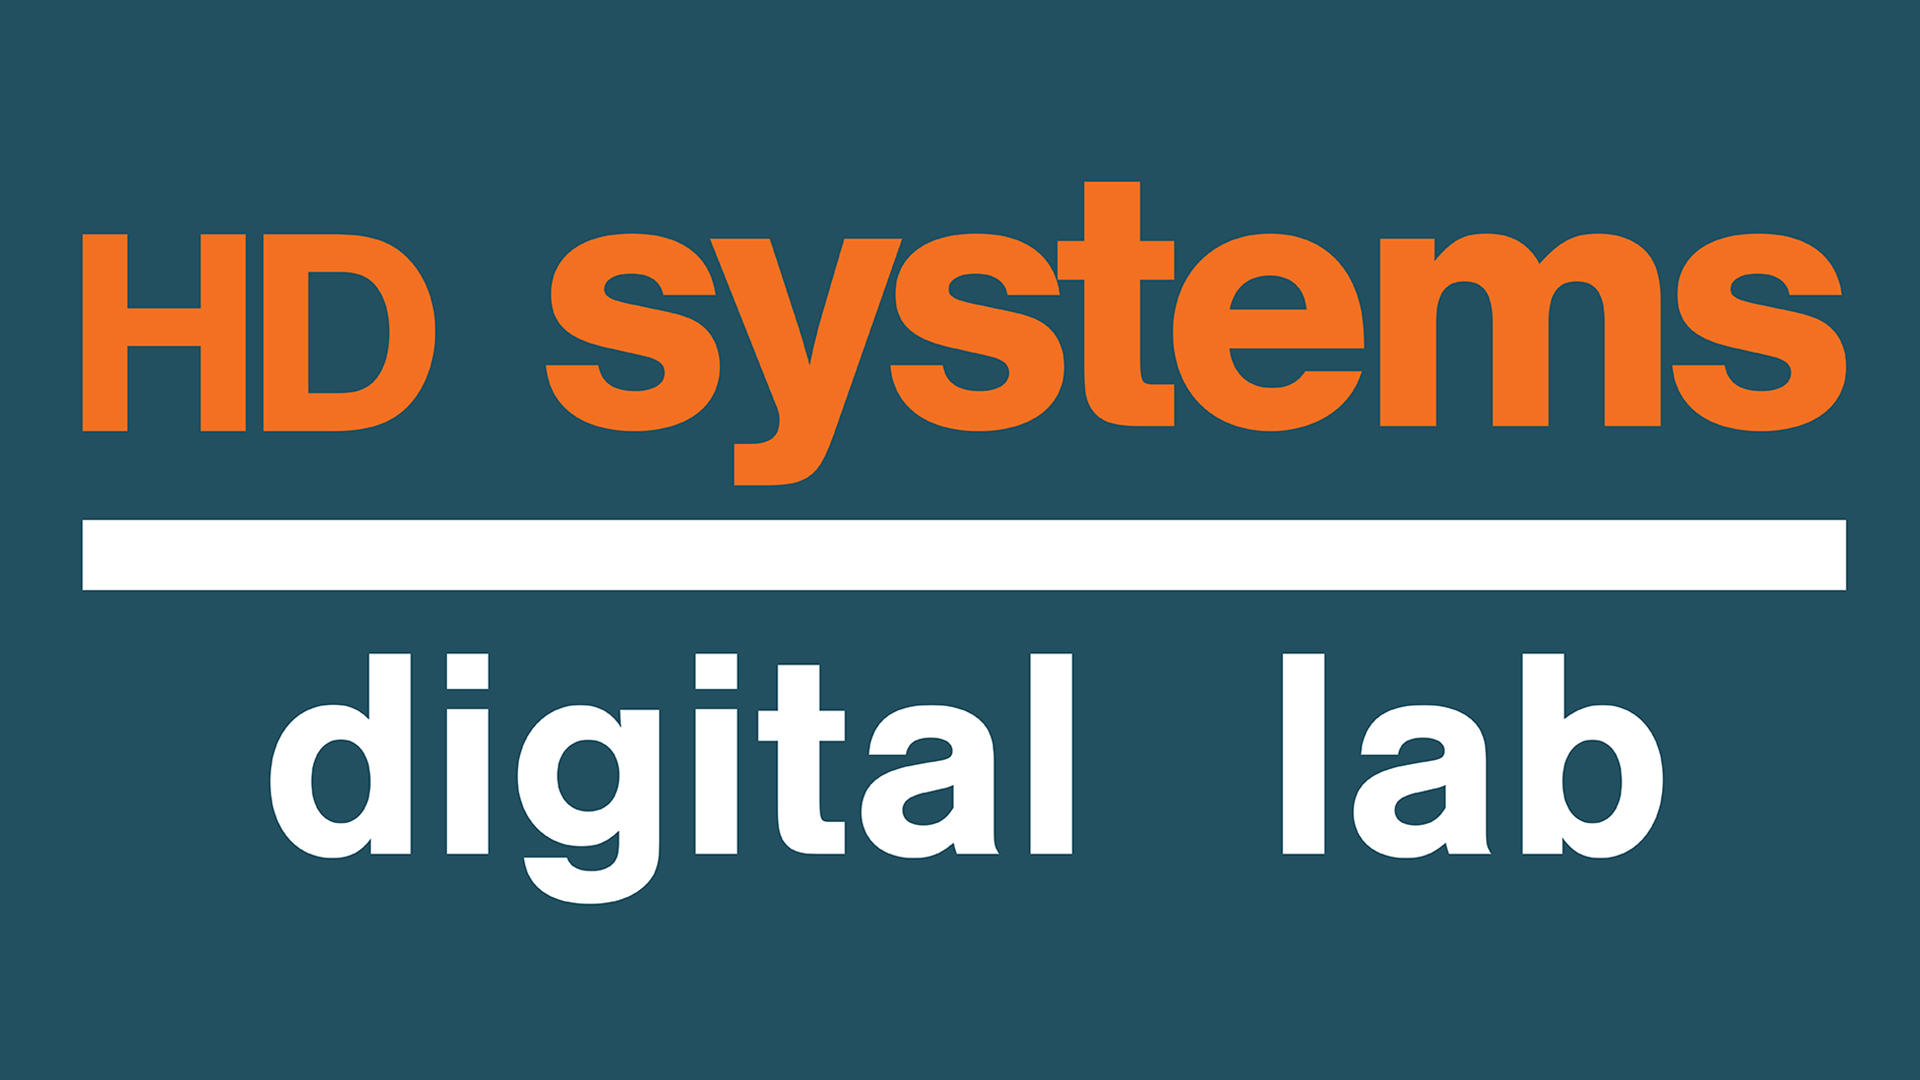 HD-Systems